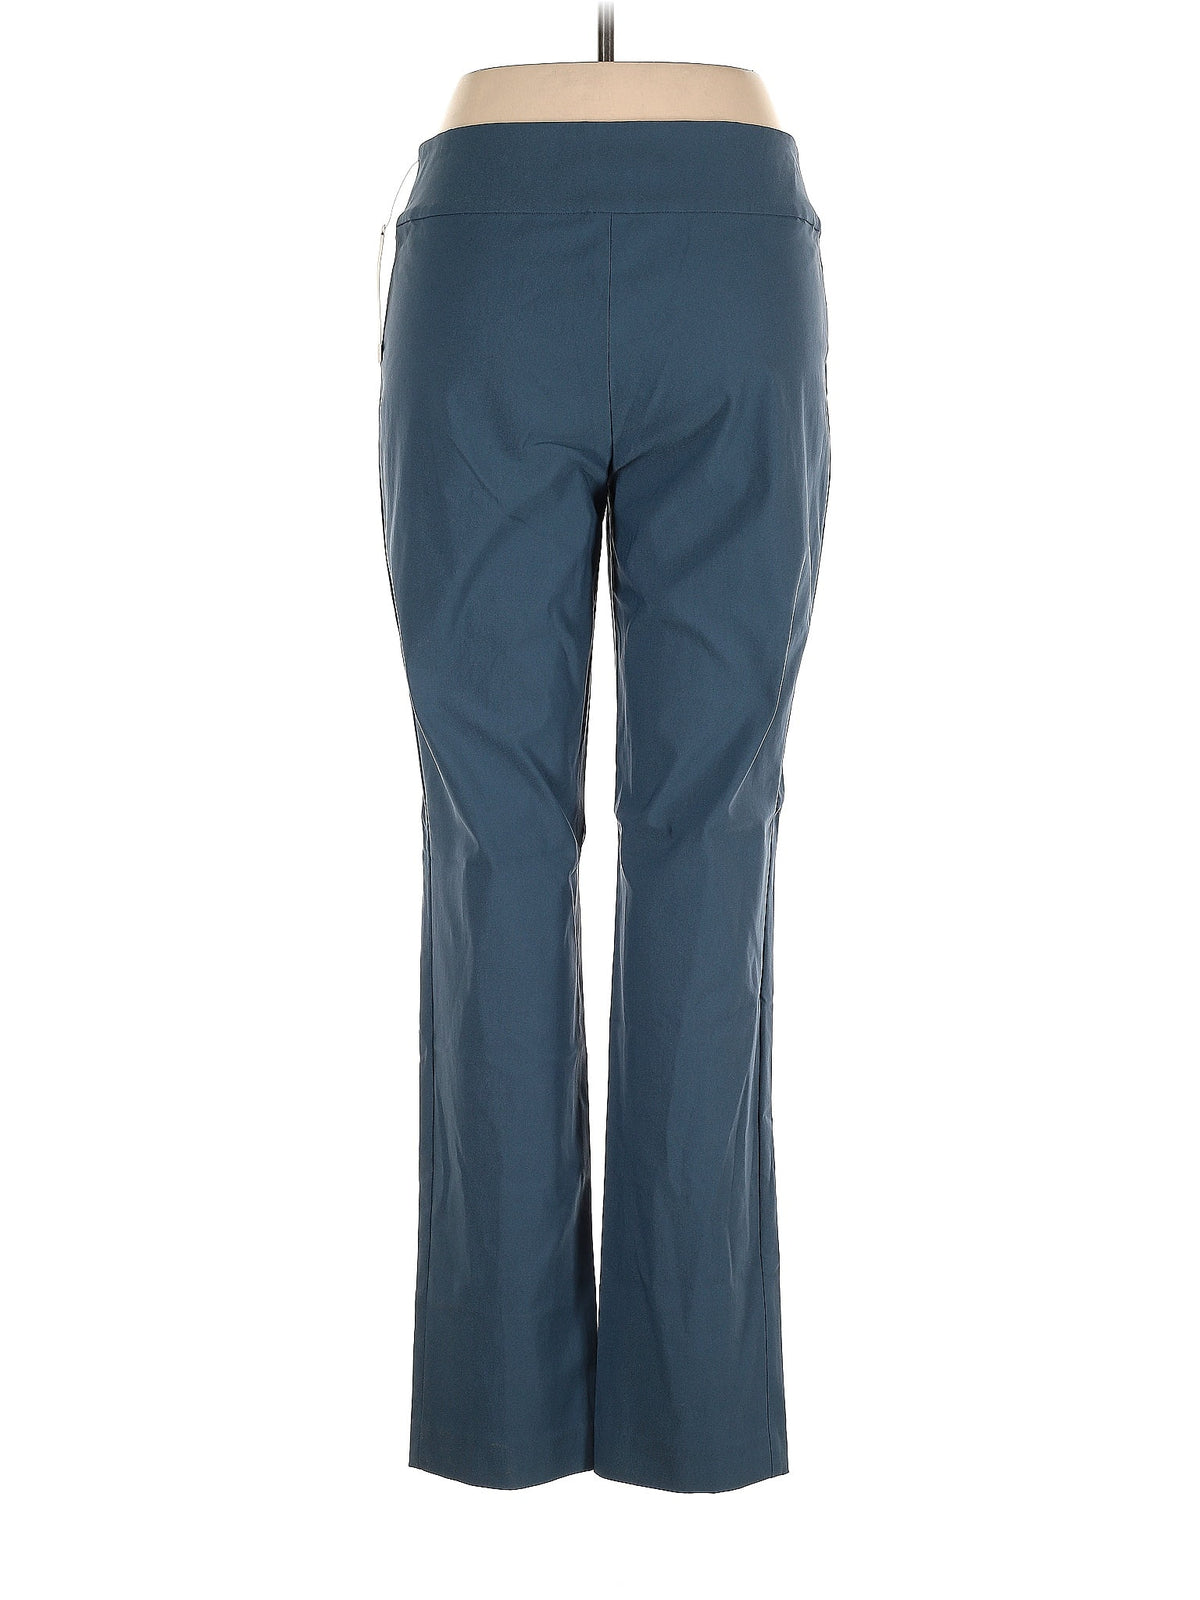 Casual Pants size - 10